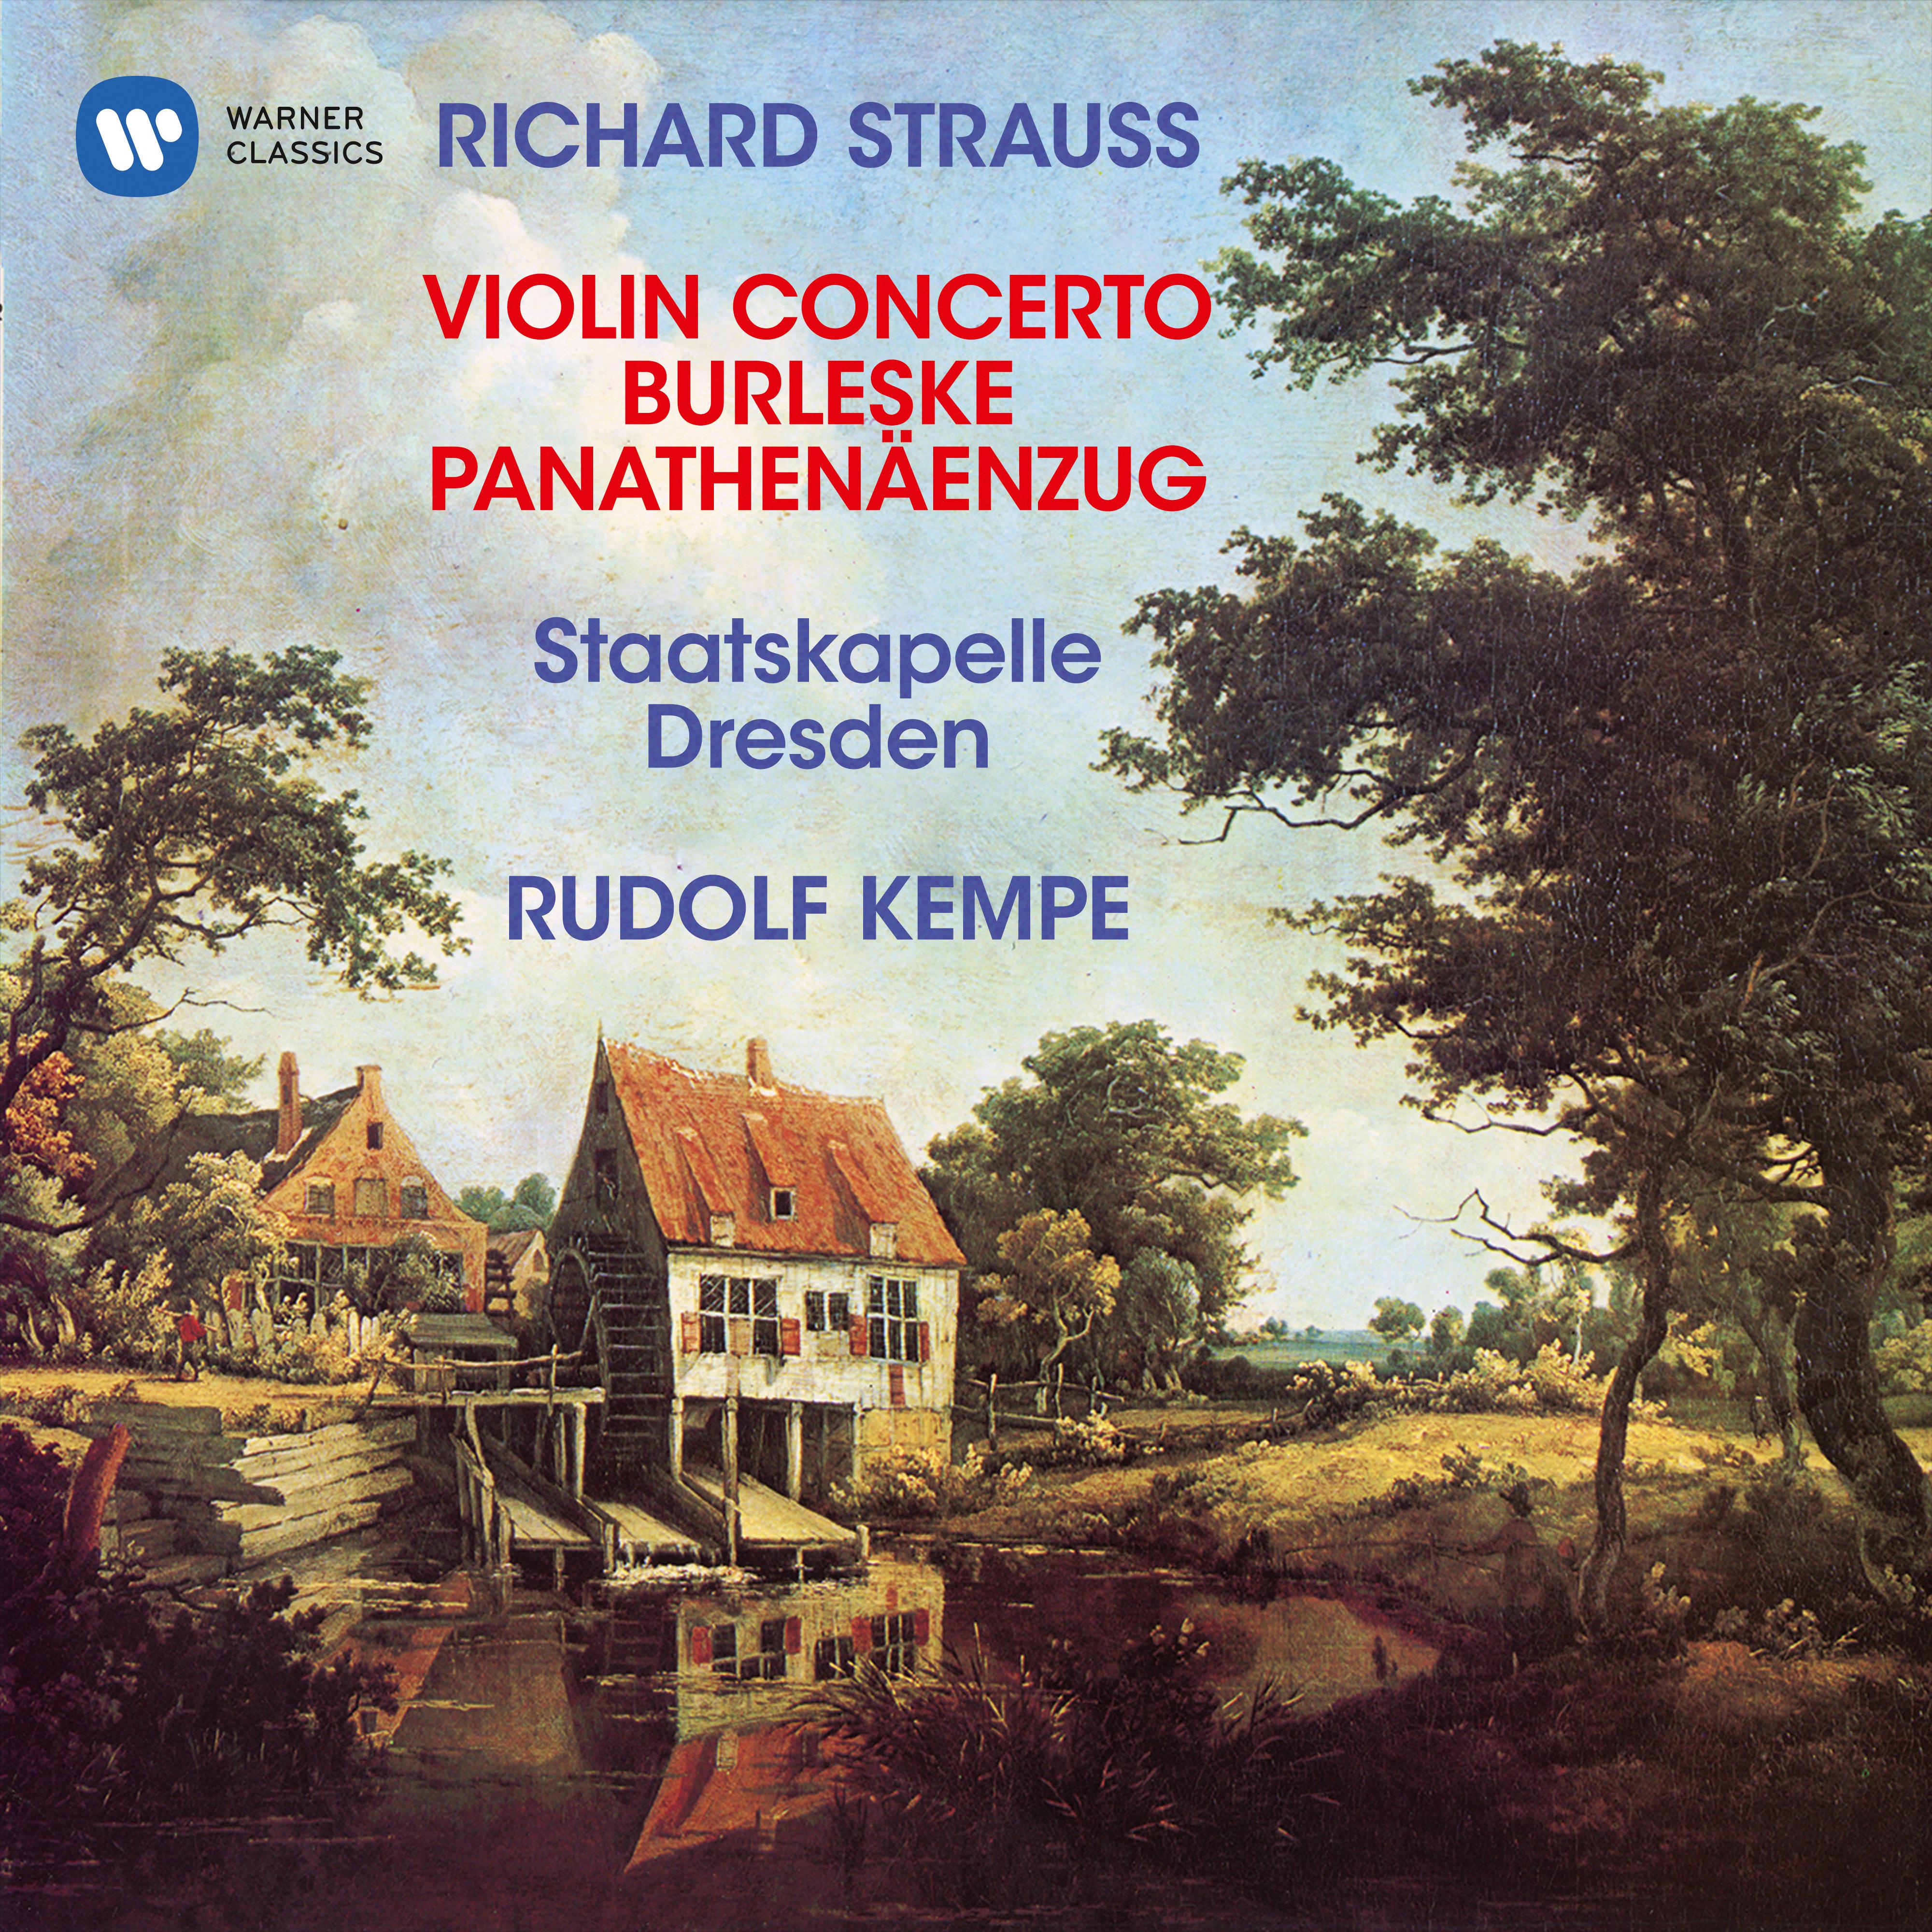 Strauss, R: Violin Concerto, Op. 8, Burleske for Piano and Orchestra  Panathen enzug, Op. 74